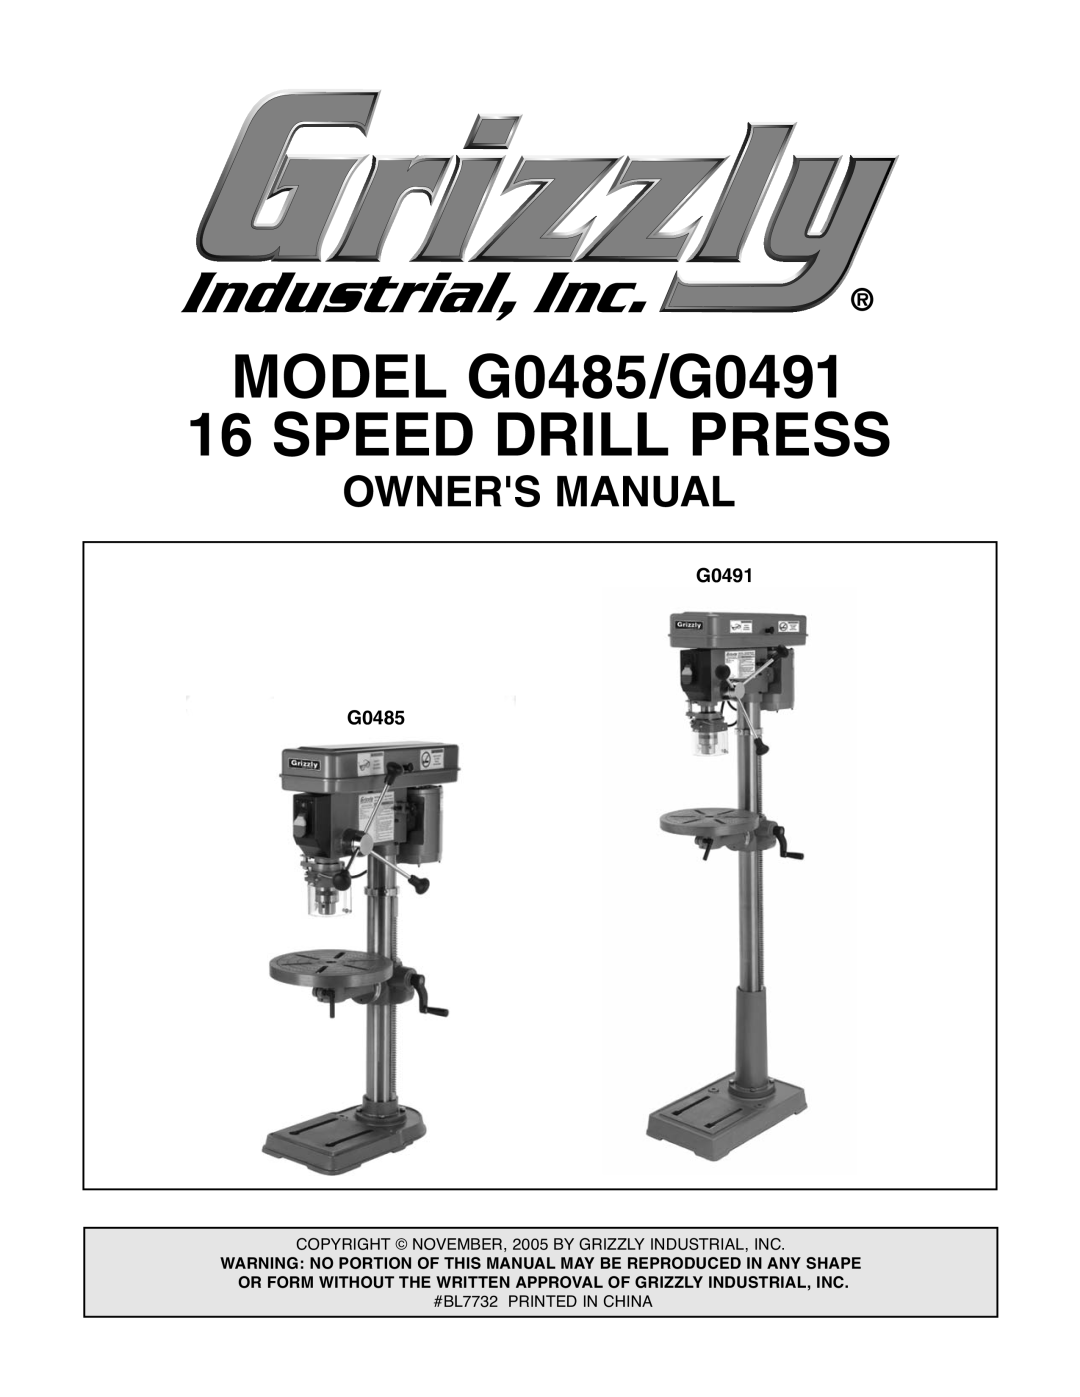 Grizzly G0485 manual 7.%2g3g-!.5,  , 235,*+7‹1290%5%*5,==/,18675,$/,1& 